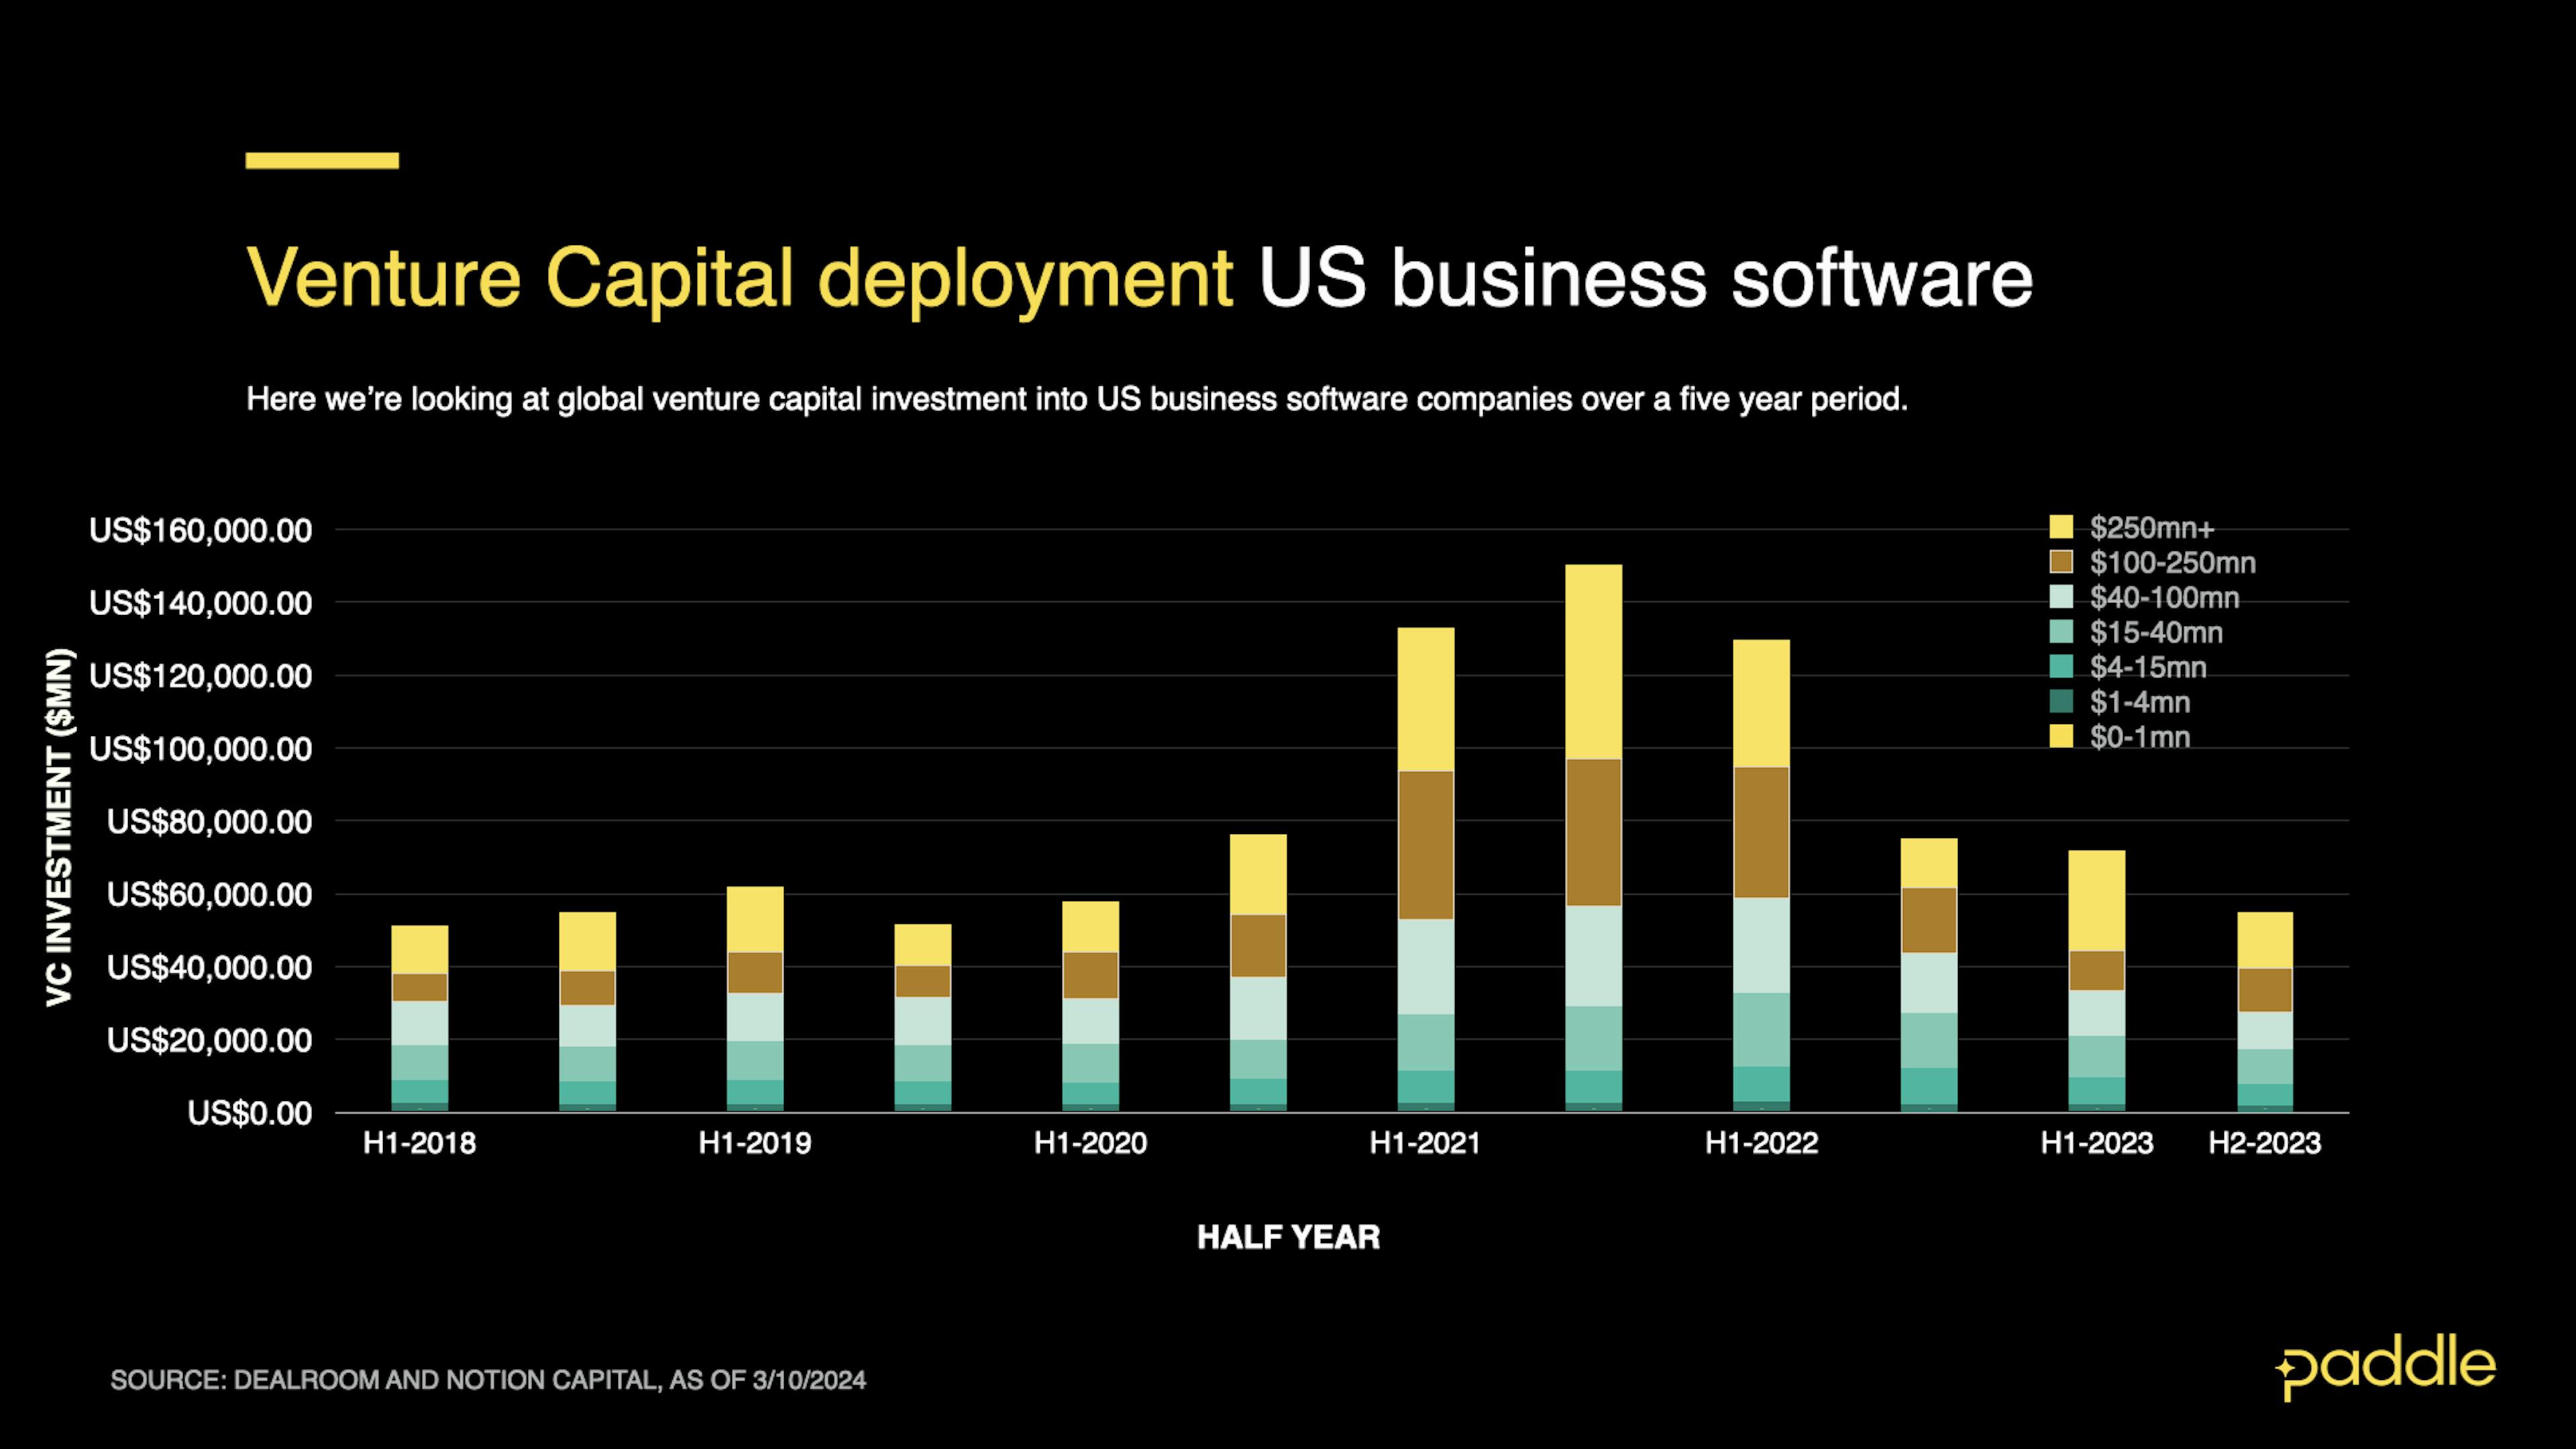 Venture capital investments into US software companies over 5 years.